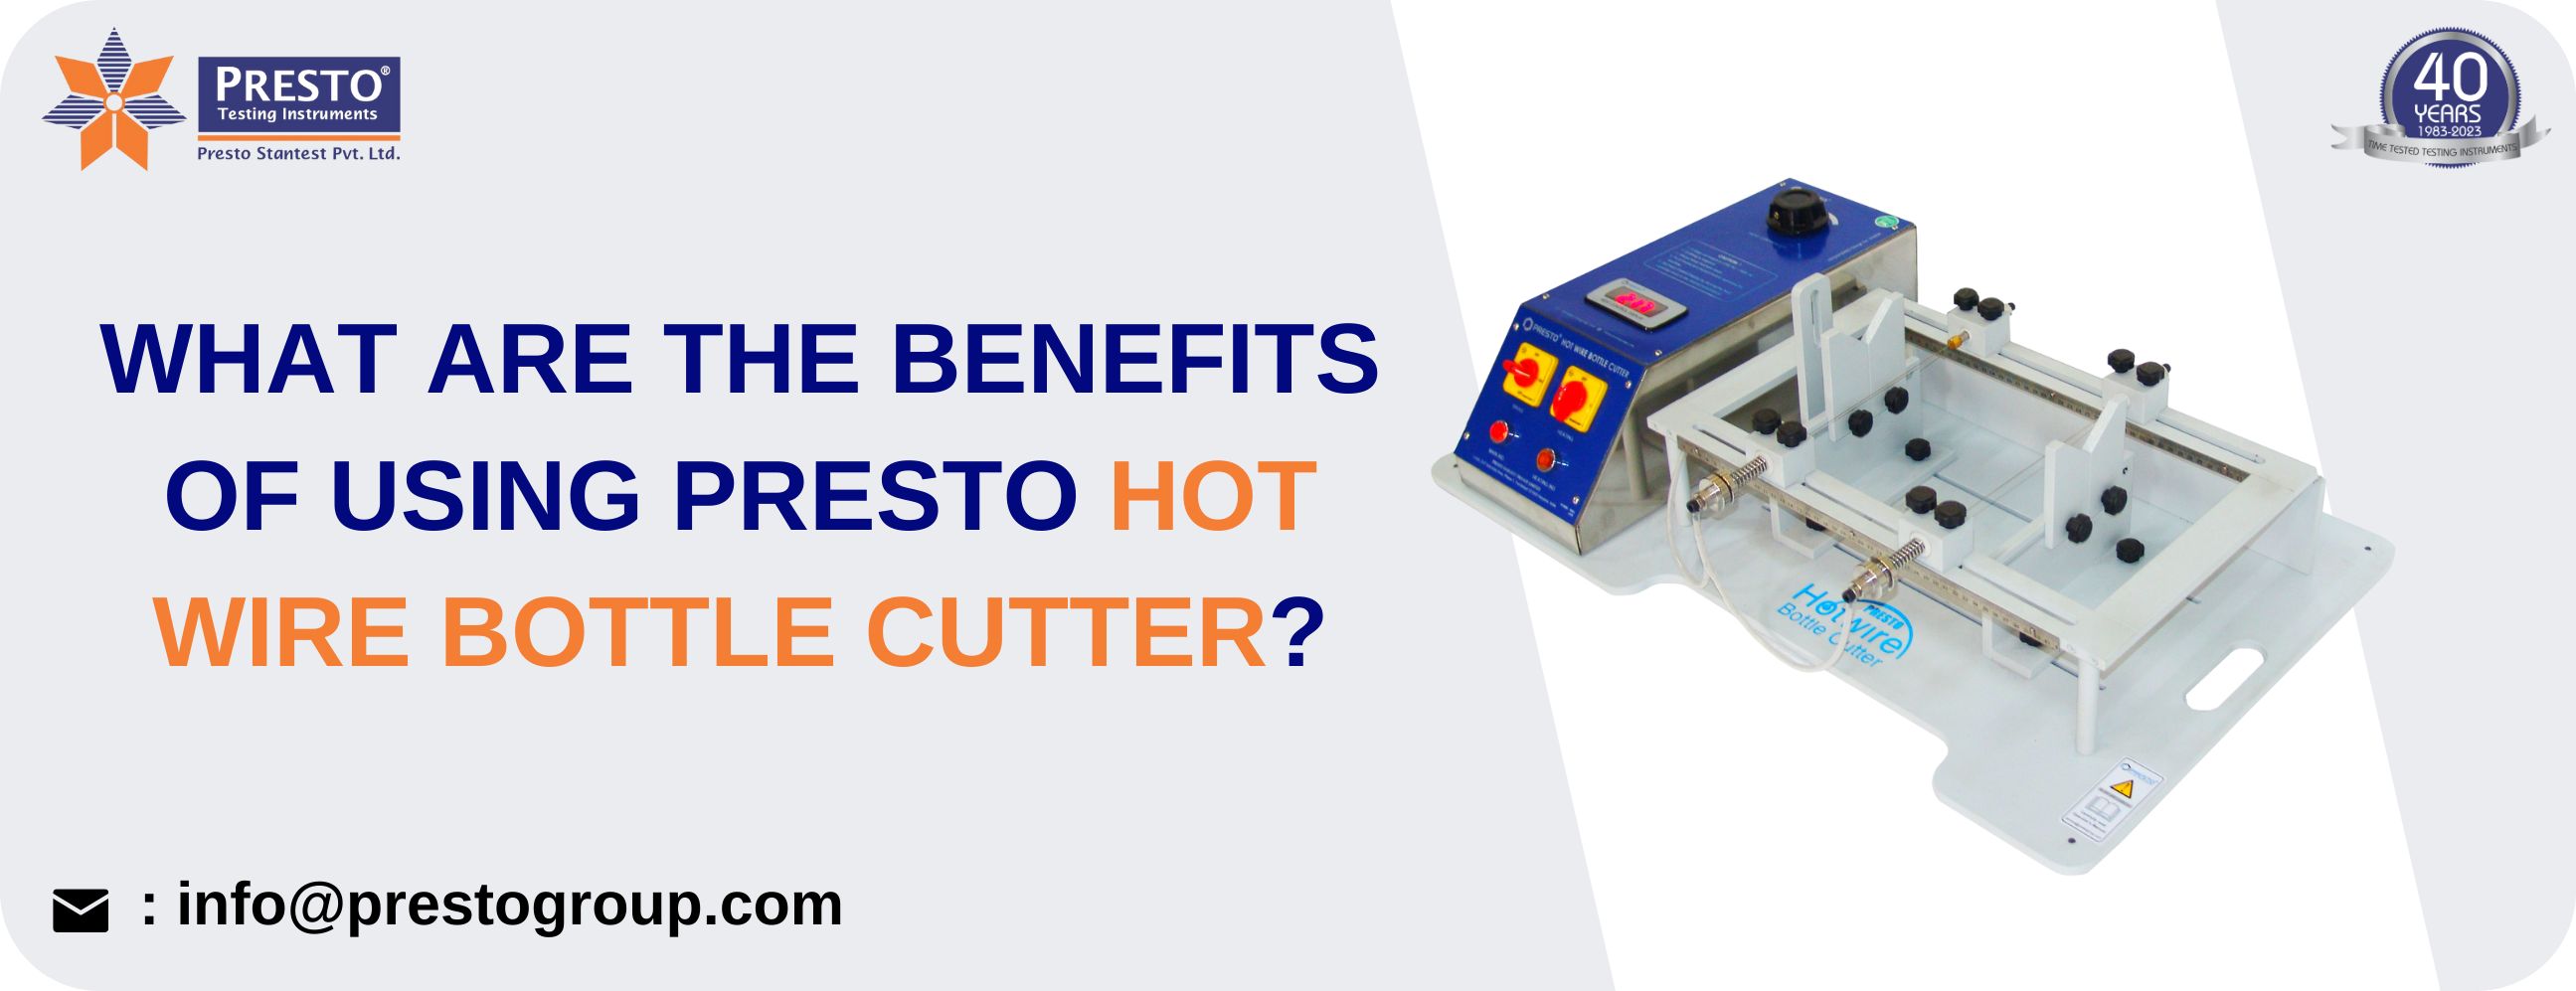 What are the benefits of using Presto hot wire bottle cutter?